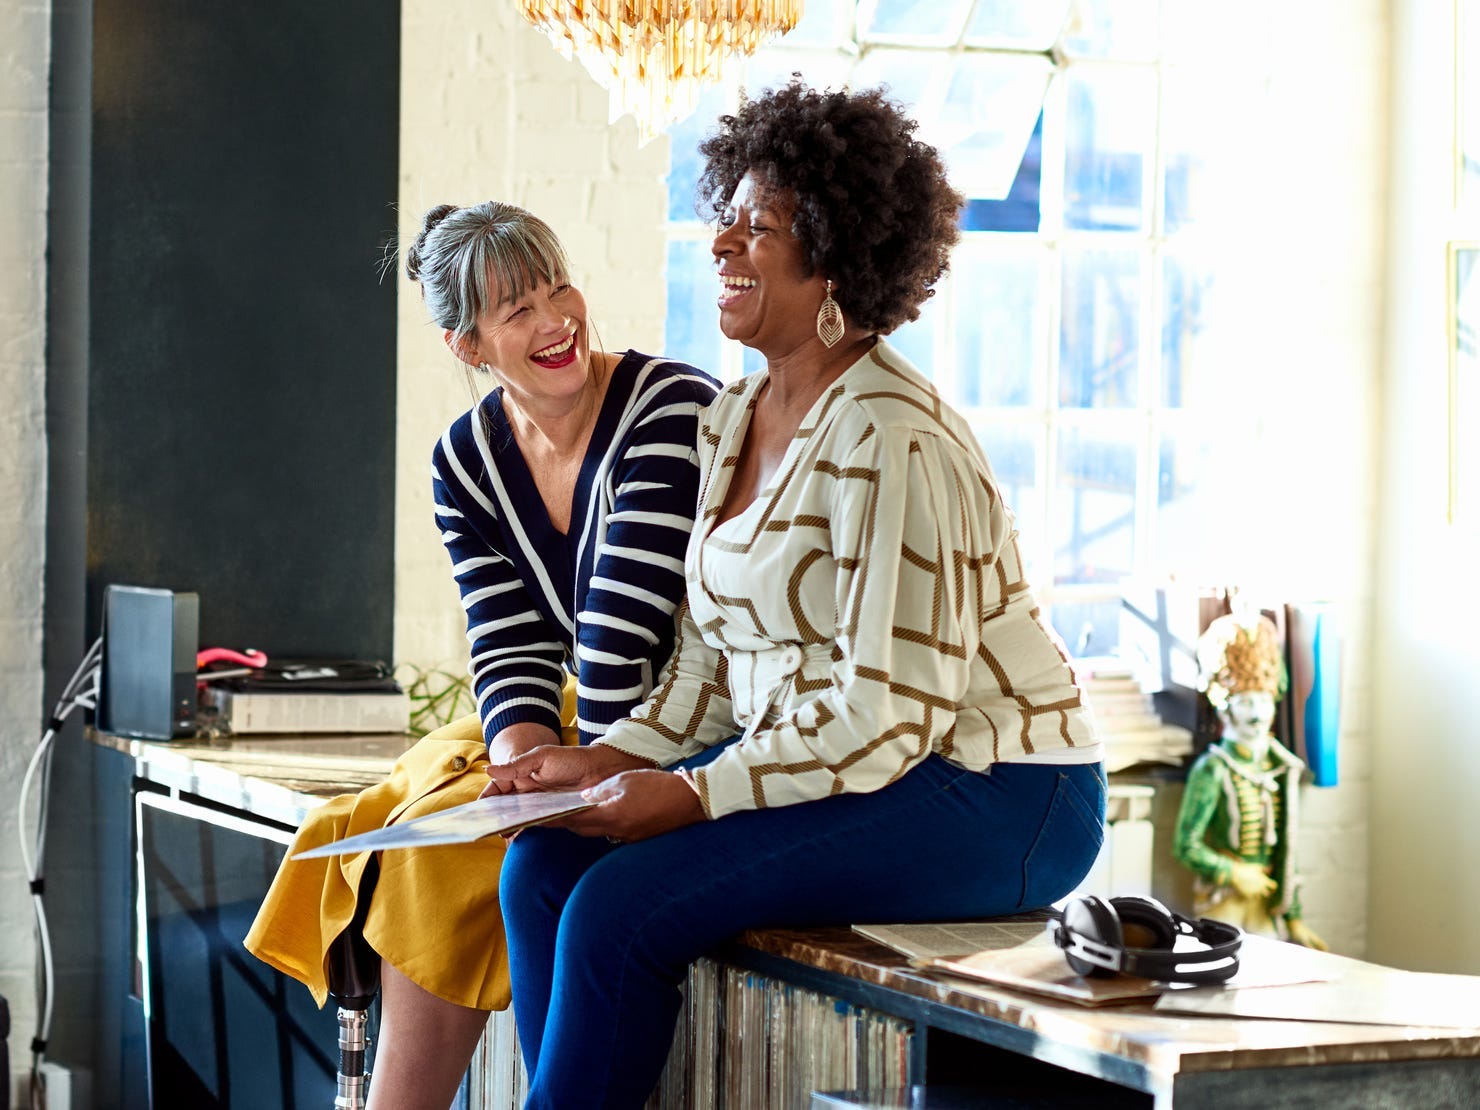 Mature women laughing together in stylish loft apartment. Two female friends sitting on sideboard and smiling.